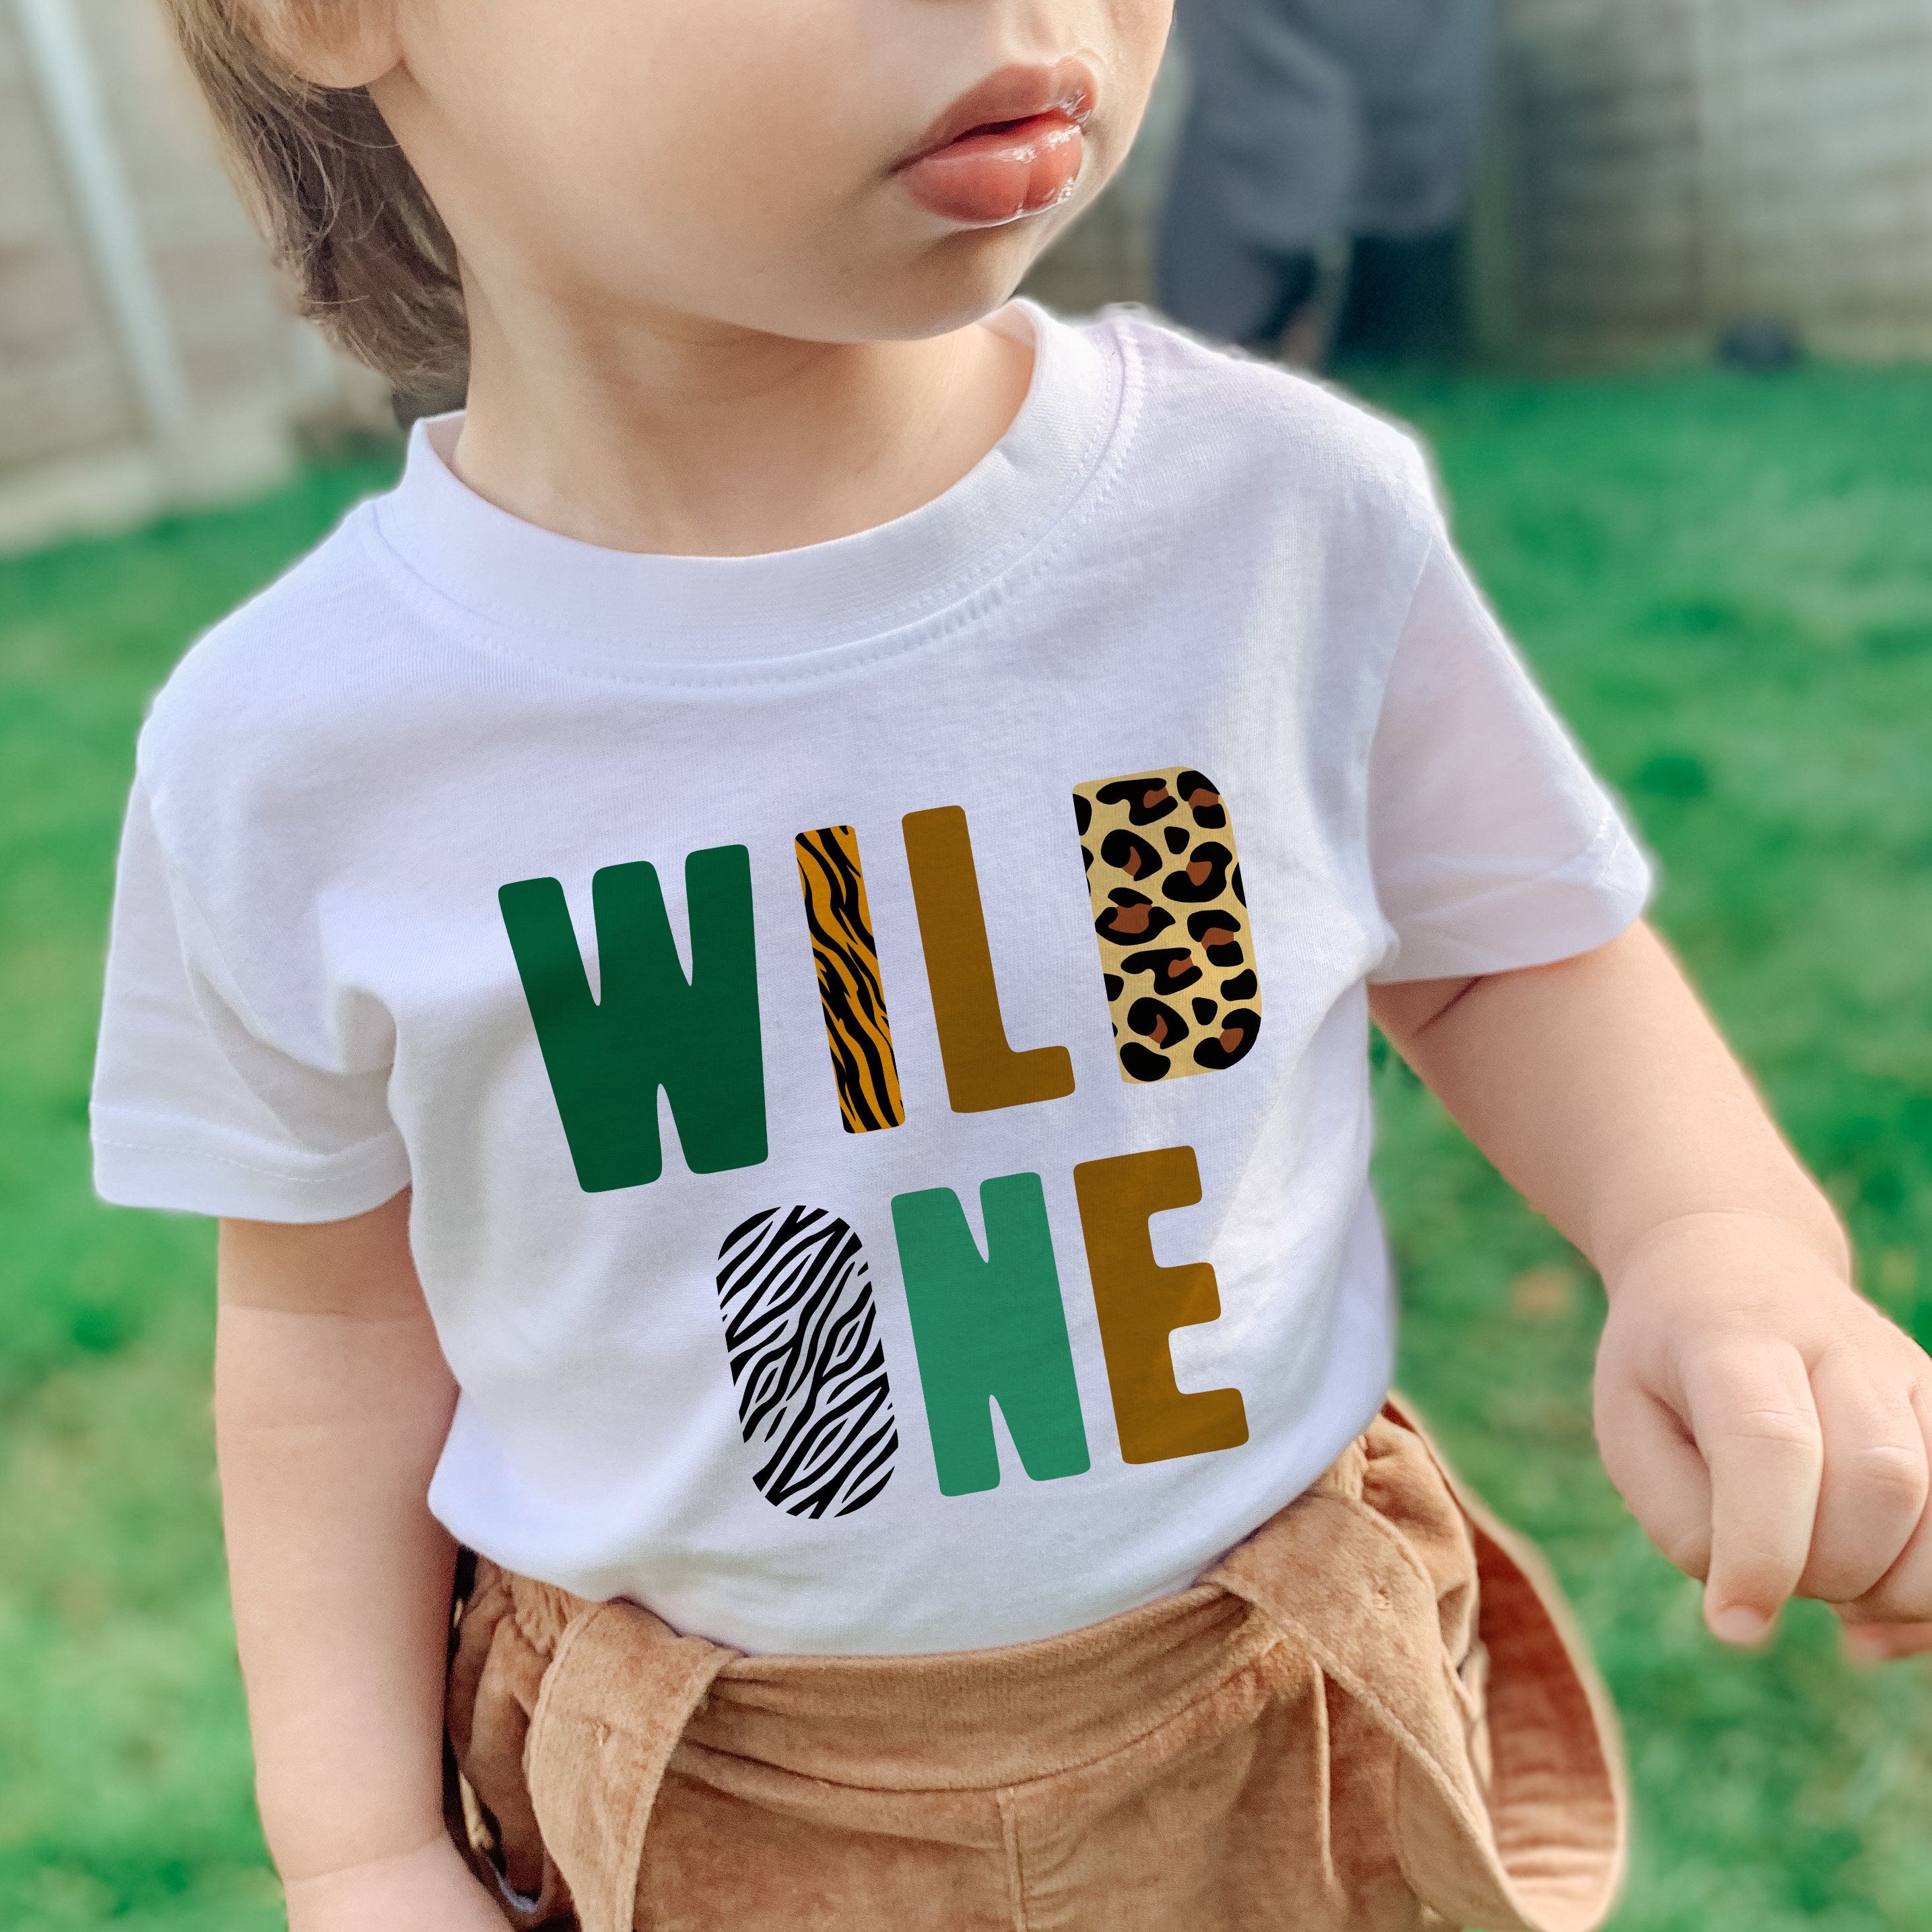 Discover Wild One Birthday family T Shirt, First birthday Onesie, Family Matching wild one shirt, Safari themed first birthday outfit